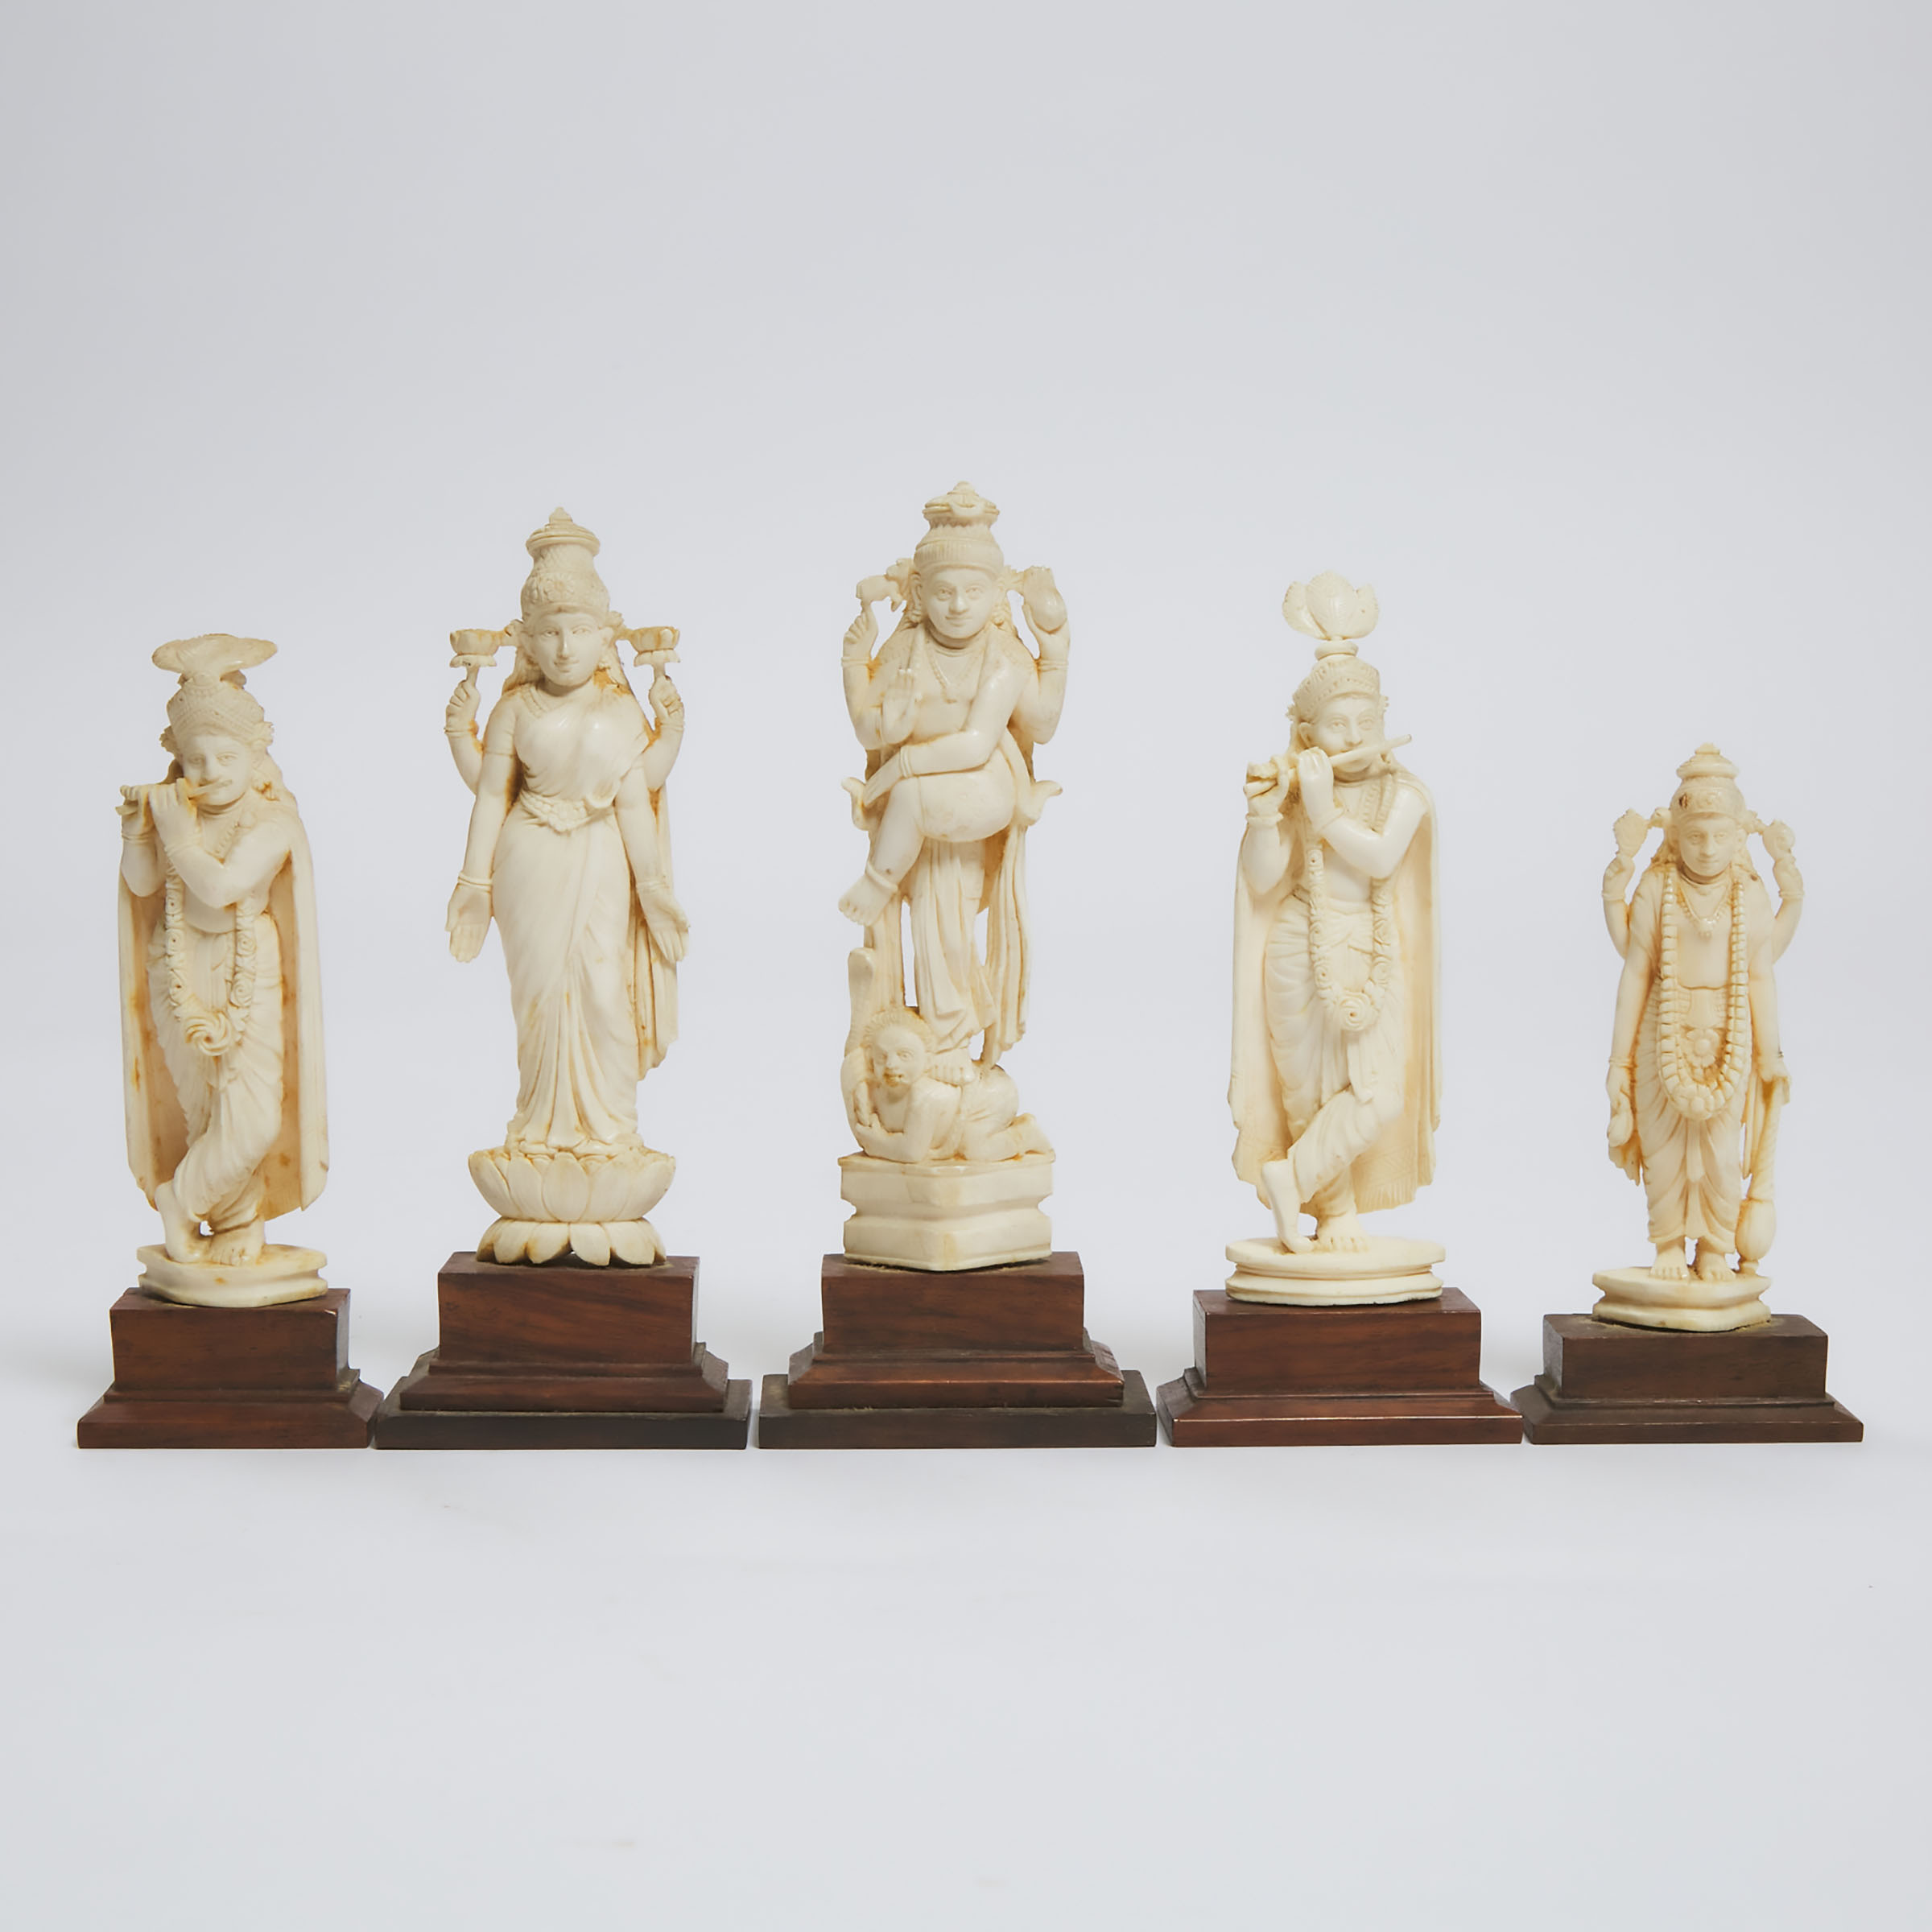 A Group of Five Indian Ivory Figures, Early 20th Century